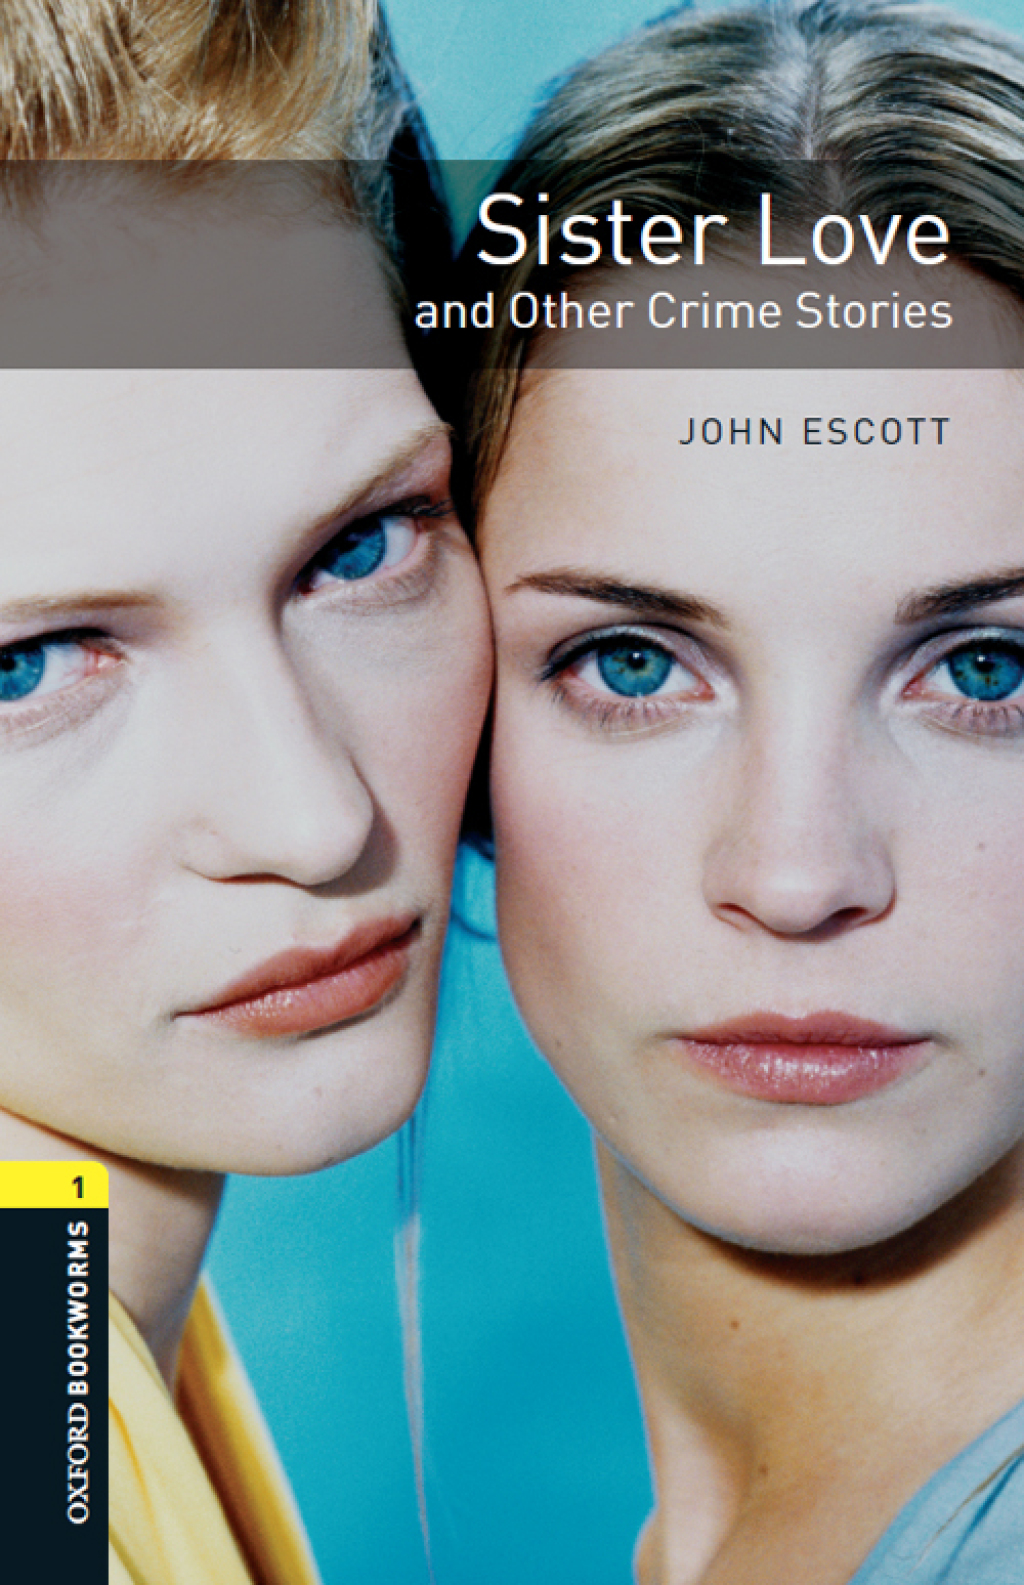 Sister Love and Other Crime Stories Level 1 Oxford Bookworms Library - 3rd Edition (eBook Rental)